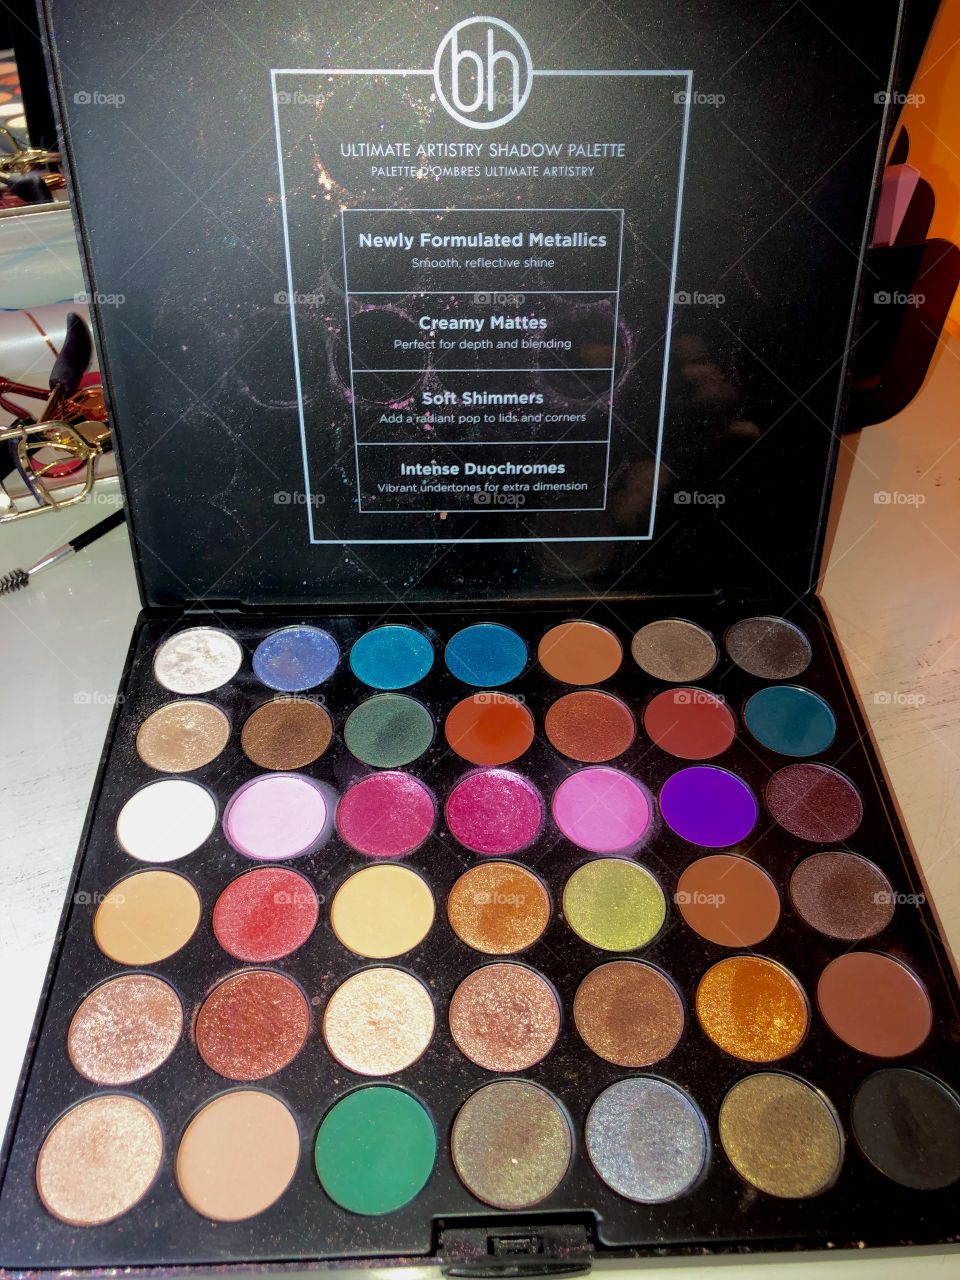 Another gorgeous addition to my makeup collection by bhcosmetics.  Beautiful mattes,shimmers,& metallics w/ duochromes.  Just look at these colors, I’m in love.